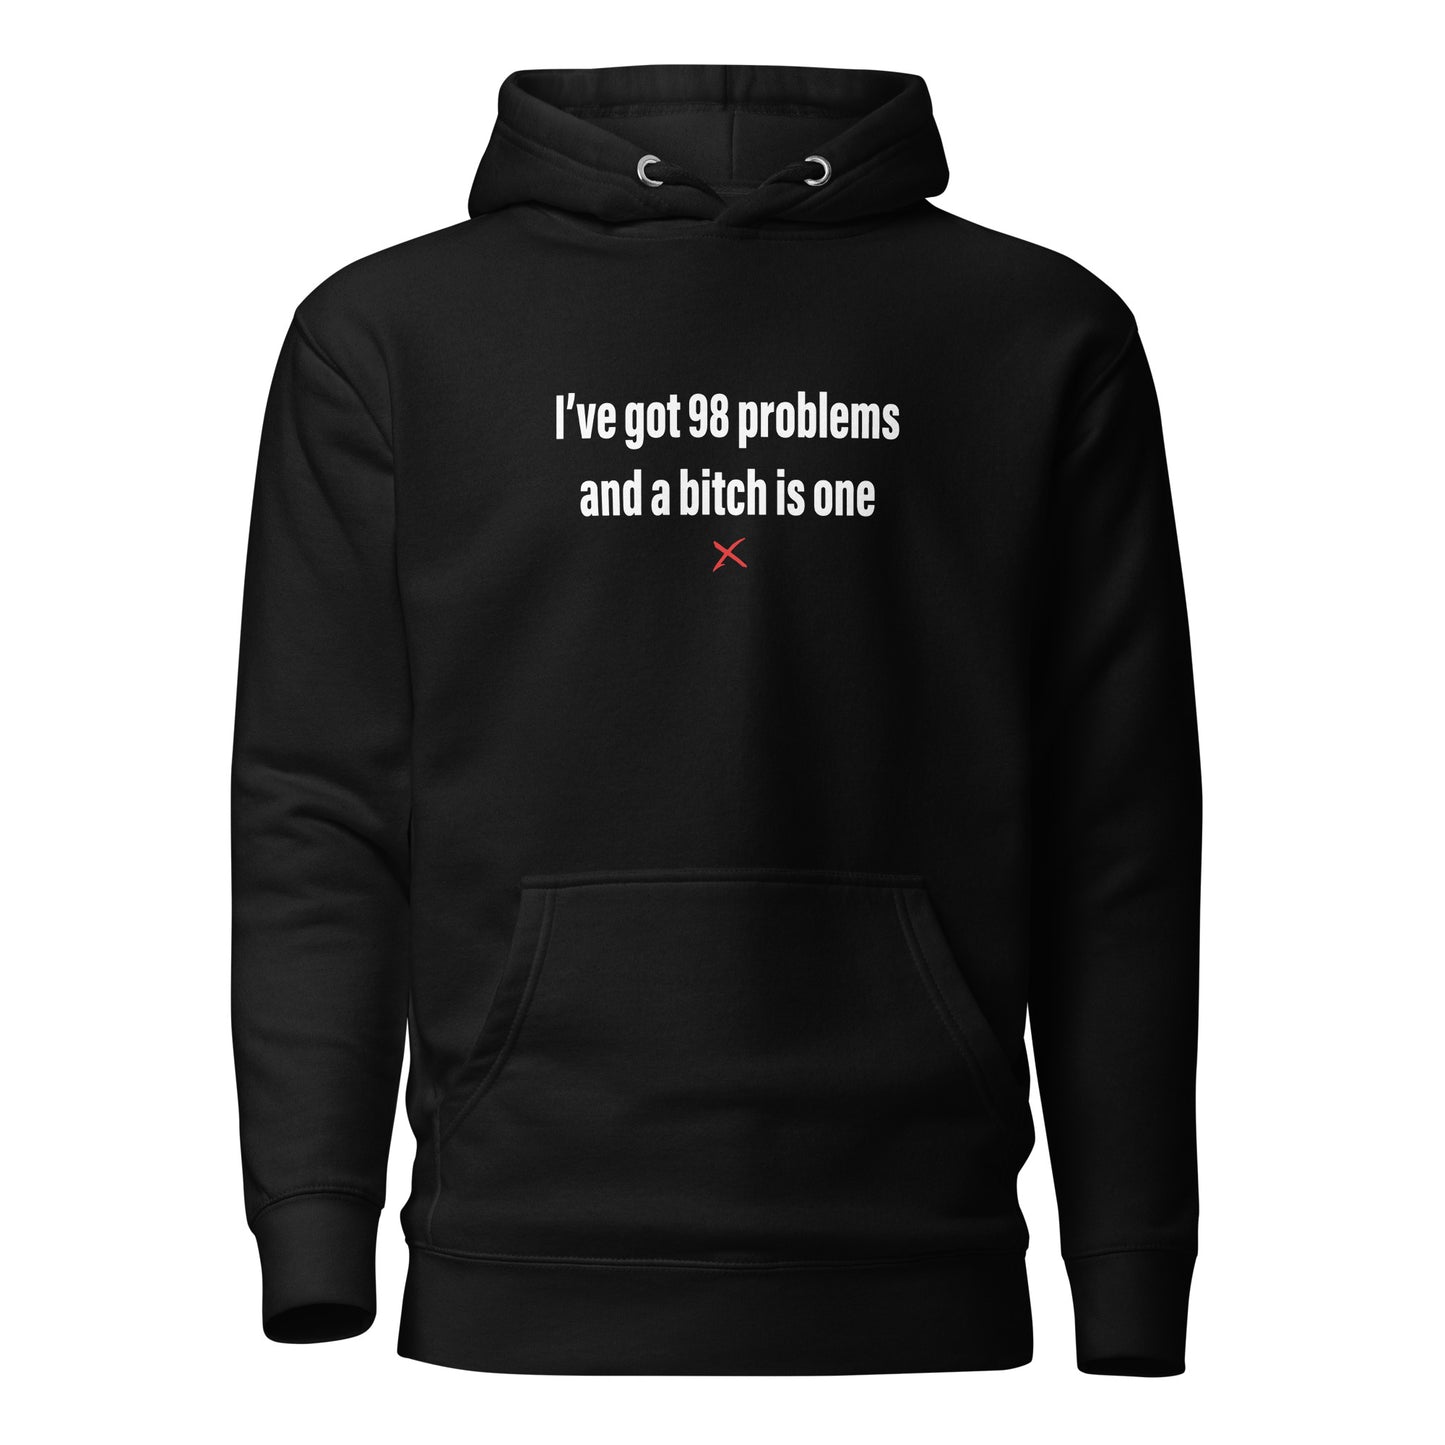 I've got 98 problems and a bitch is one - Hoodie